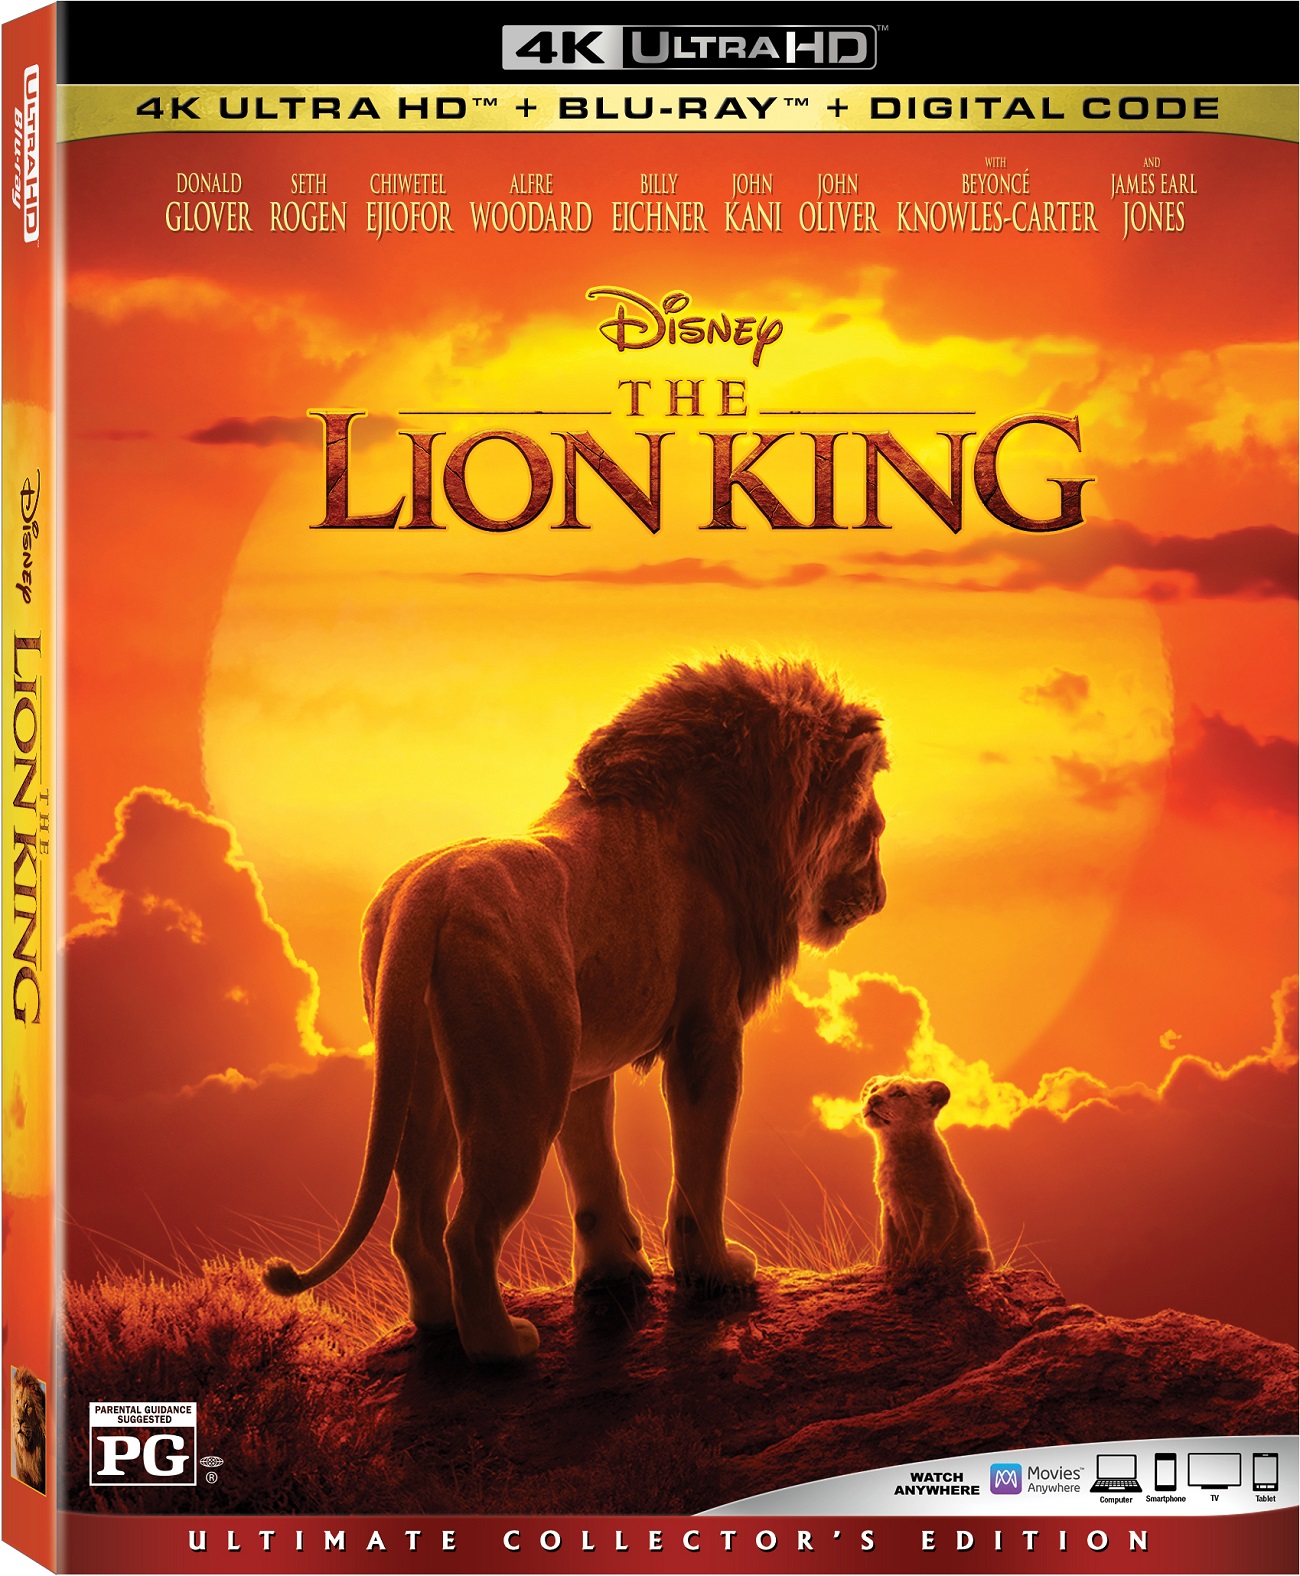 The Lion King home release Blu-ray DVD